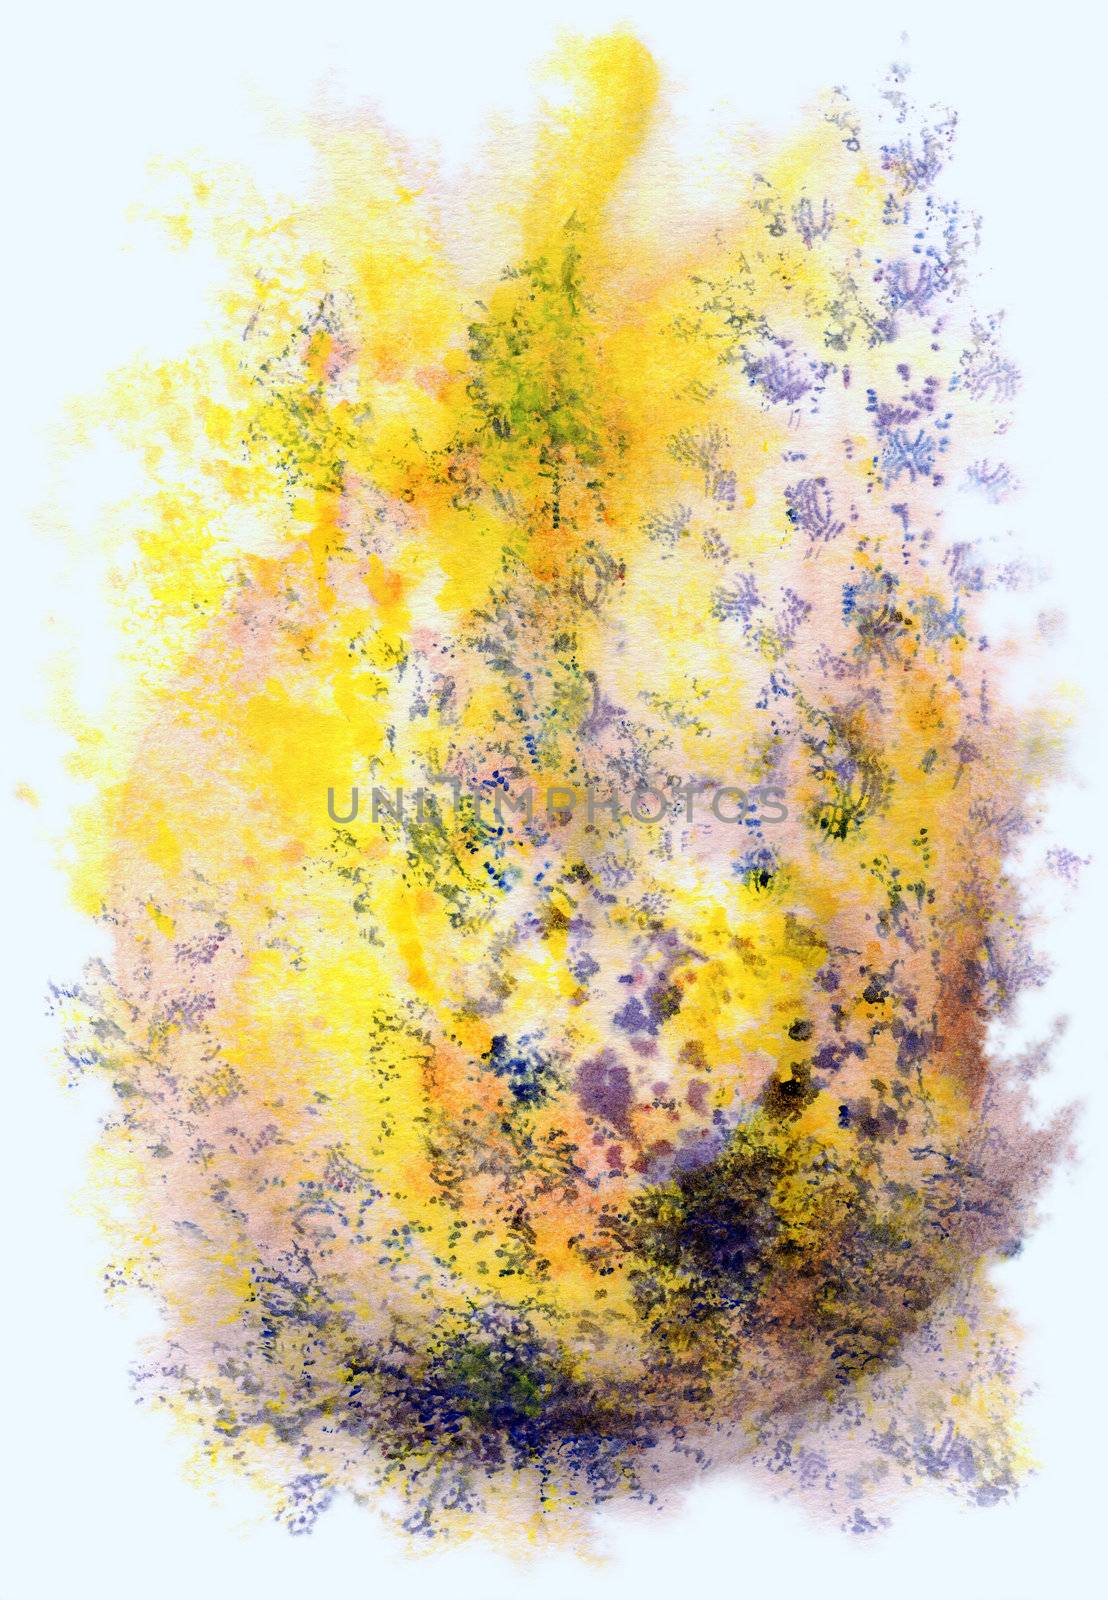 Abstract background, watercolor, beautiful hand painted on a paper. Yellow, blue, violet